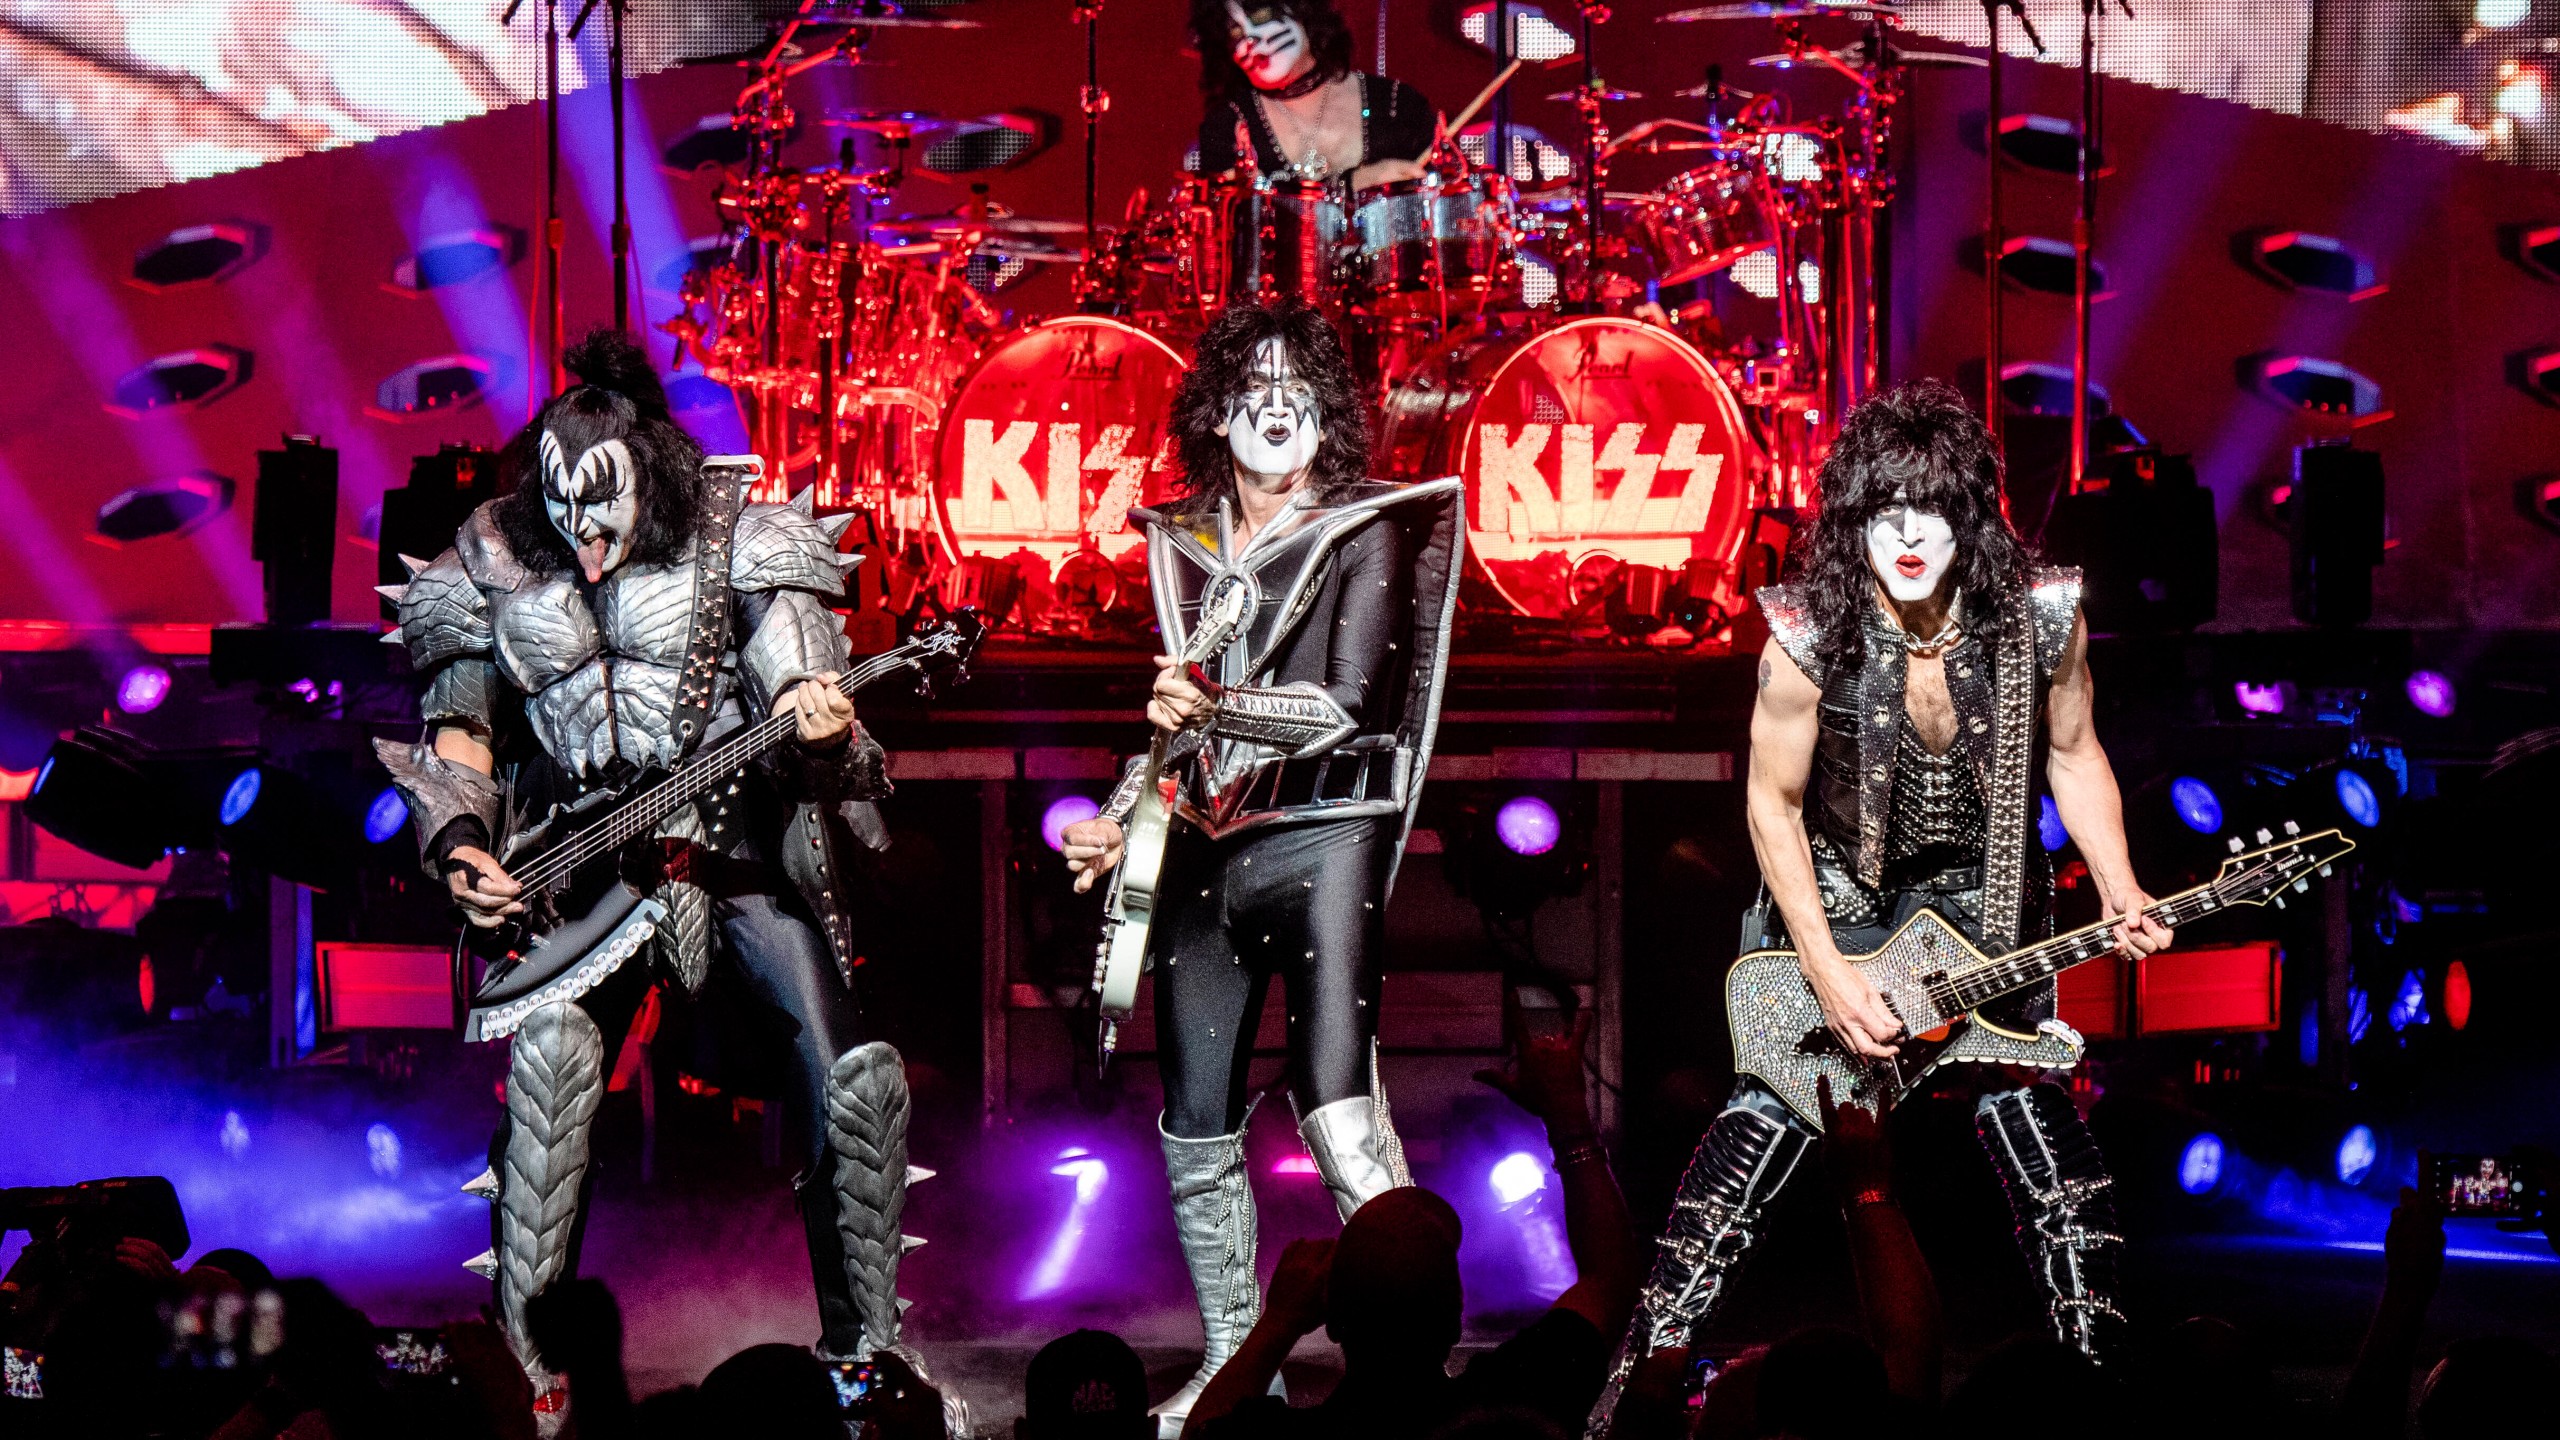 KISS to perform in Bakersfield